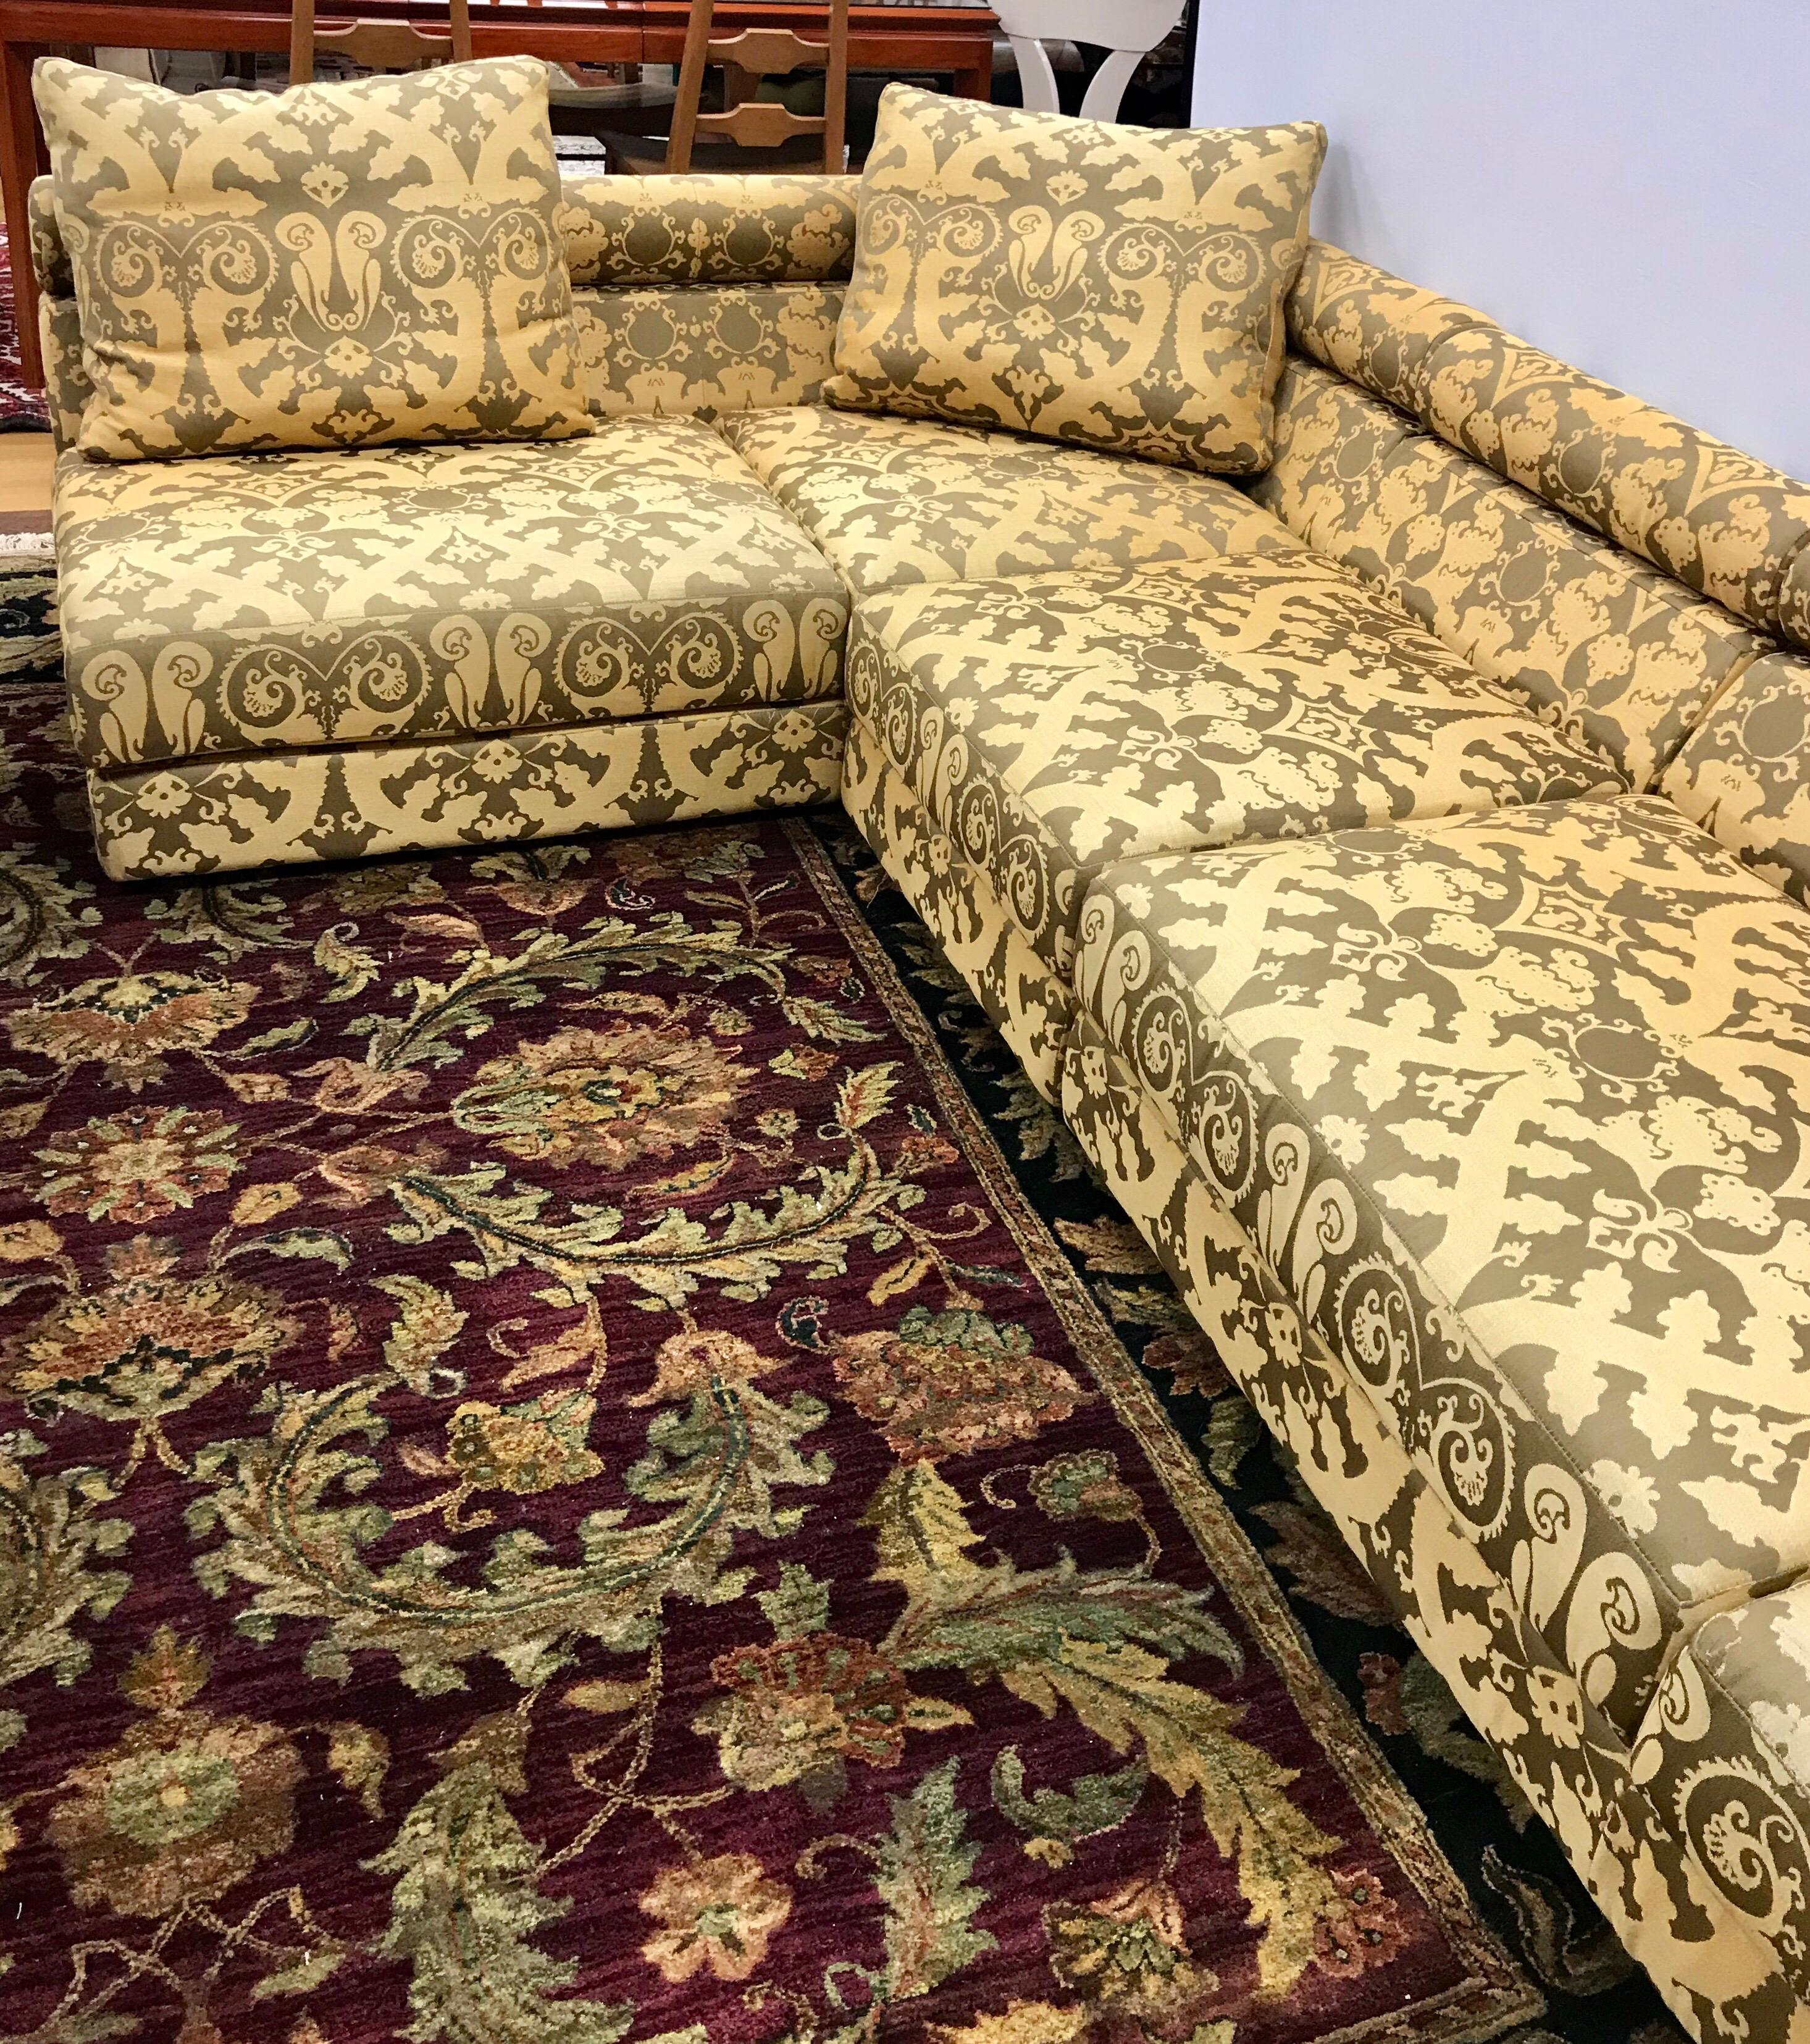 Large three-piece Roche Bobois modular sectional sofa with custom Kravet fabric. Purchased new ten year ago from Roche Bobois NYC, it has sat in a living room since then and was sat on very rarely.
As it is configured in the photos, its dimensions